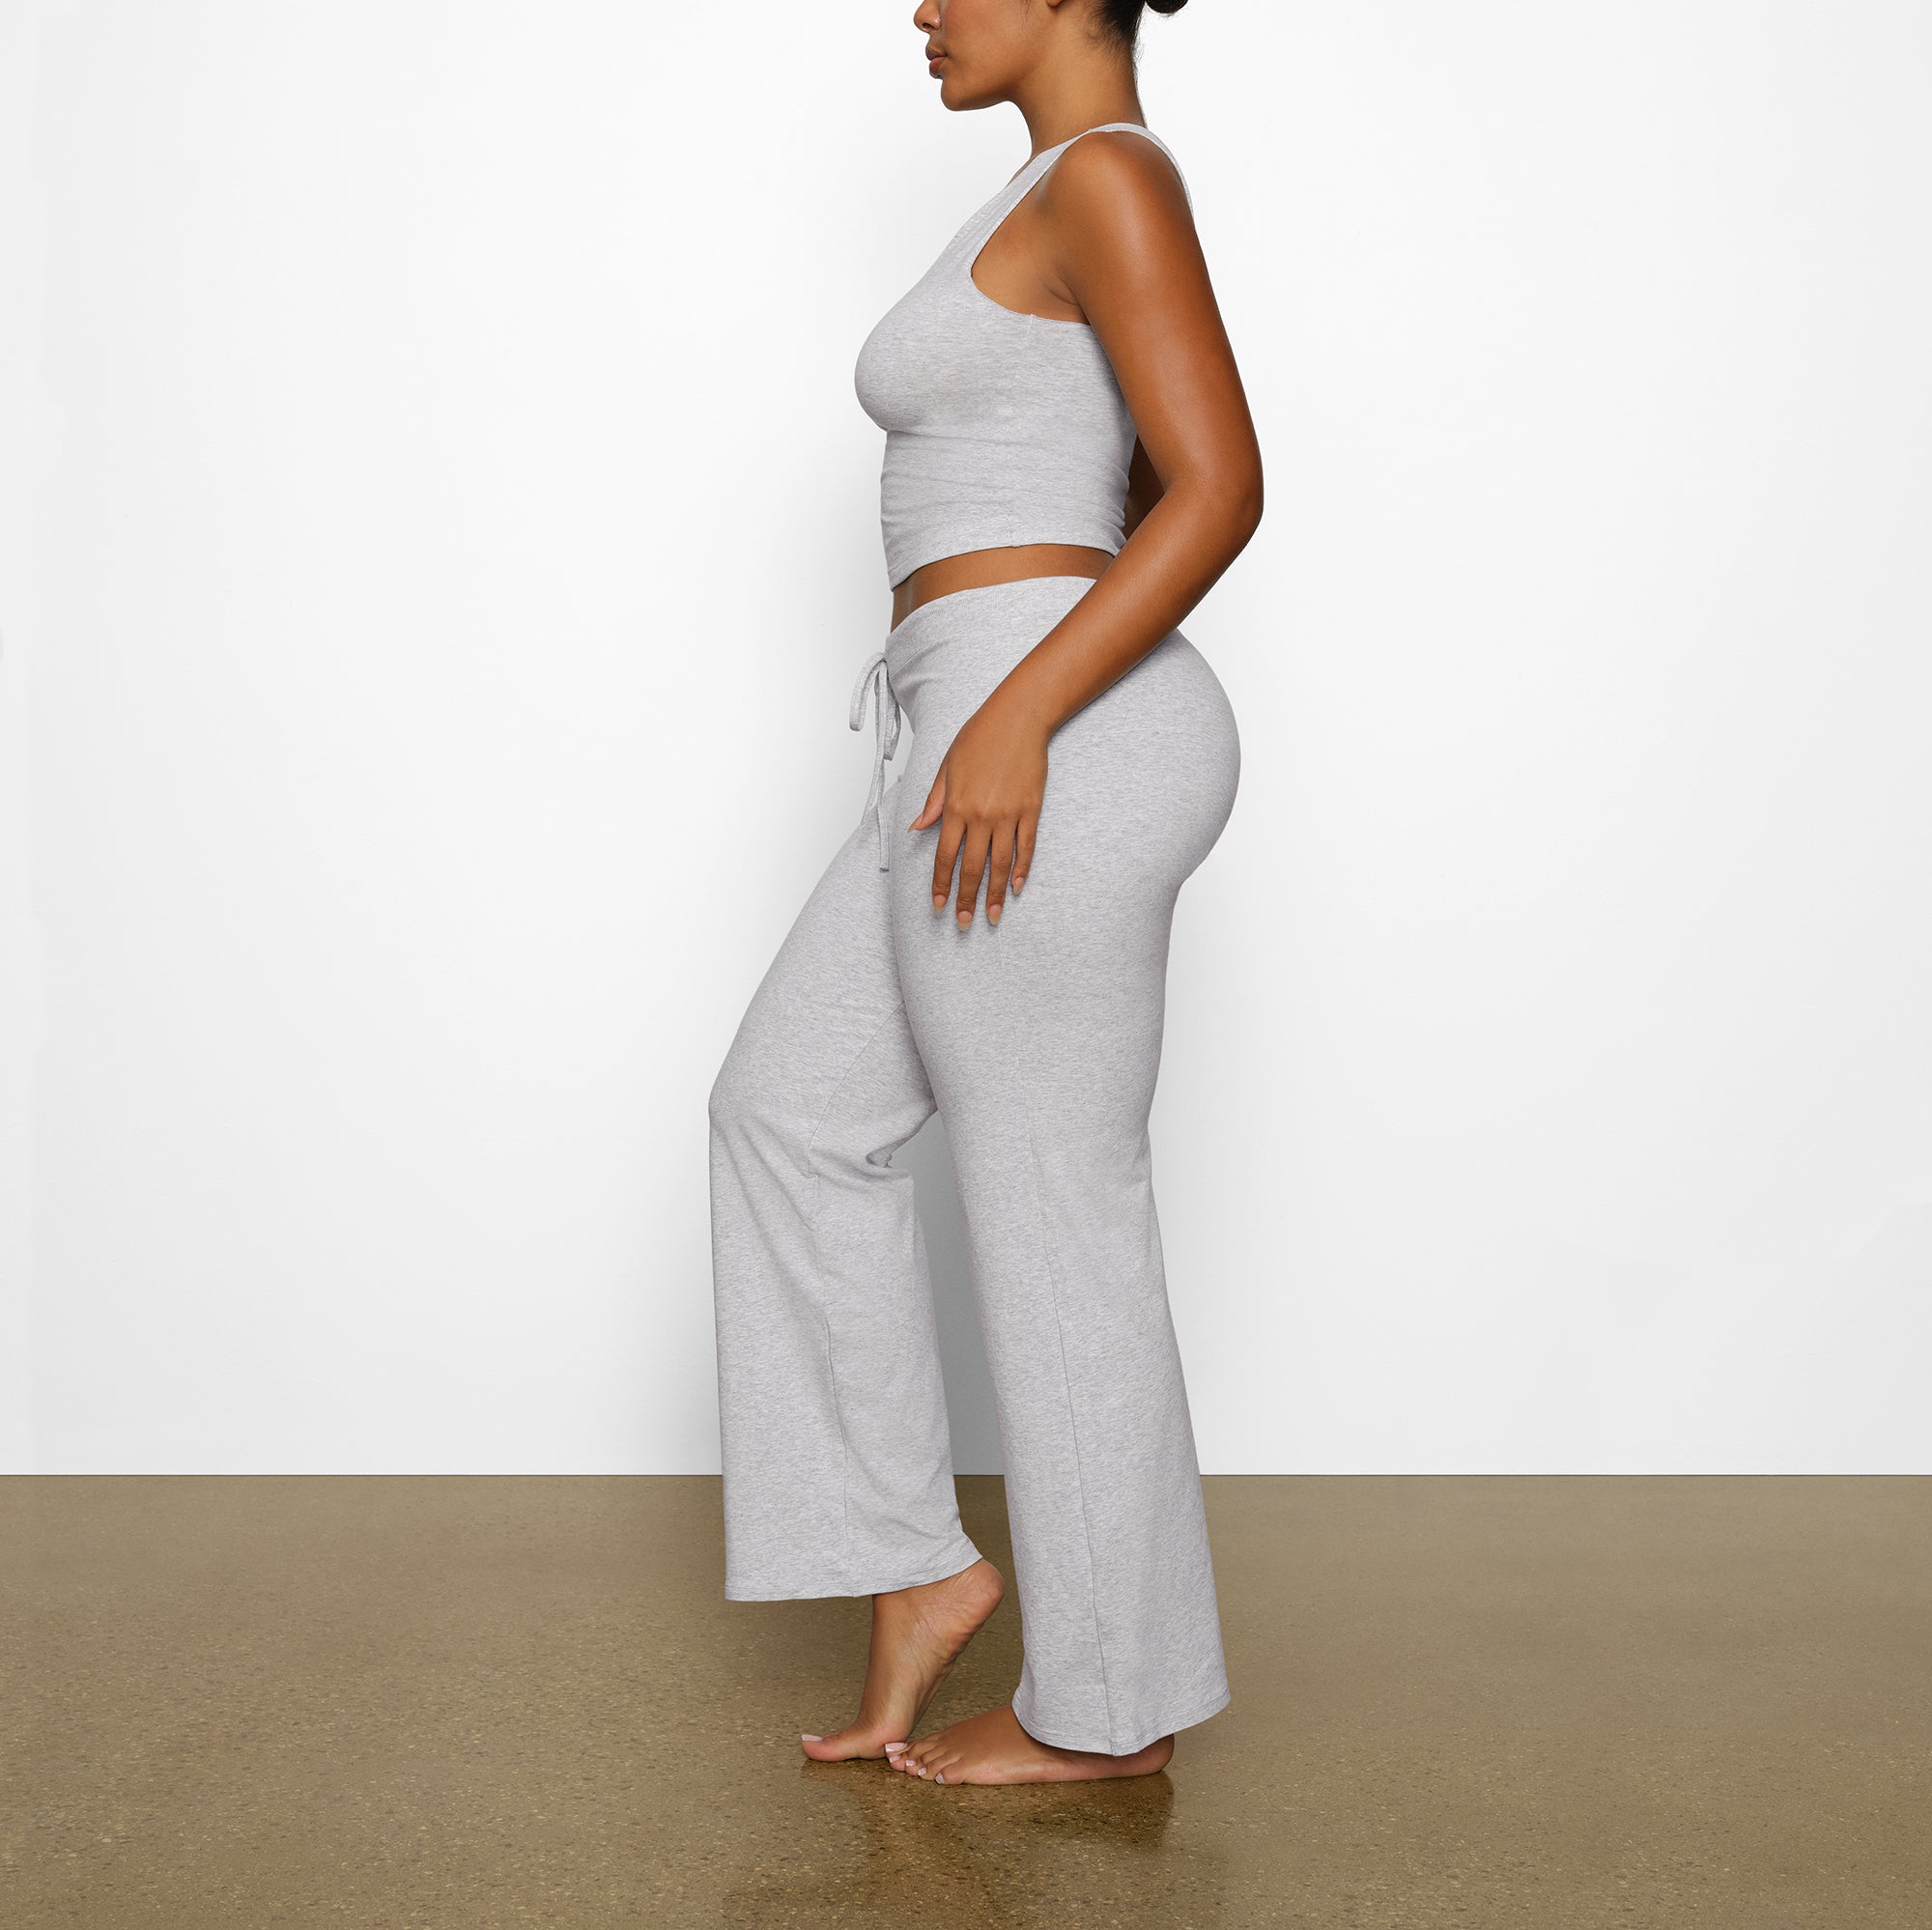 SKIMS wearing a size small in light heather grey folded pants and shi, skims fold over pant